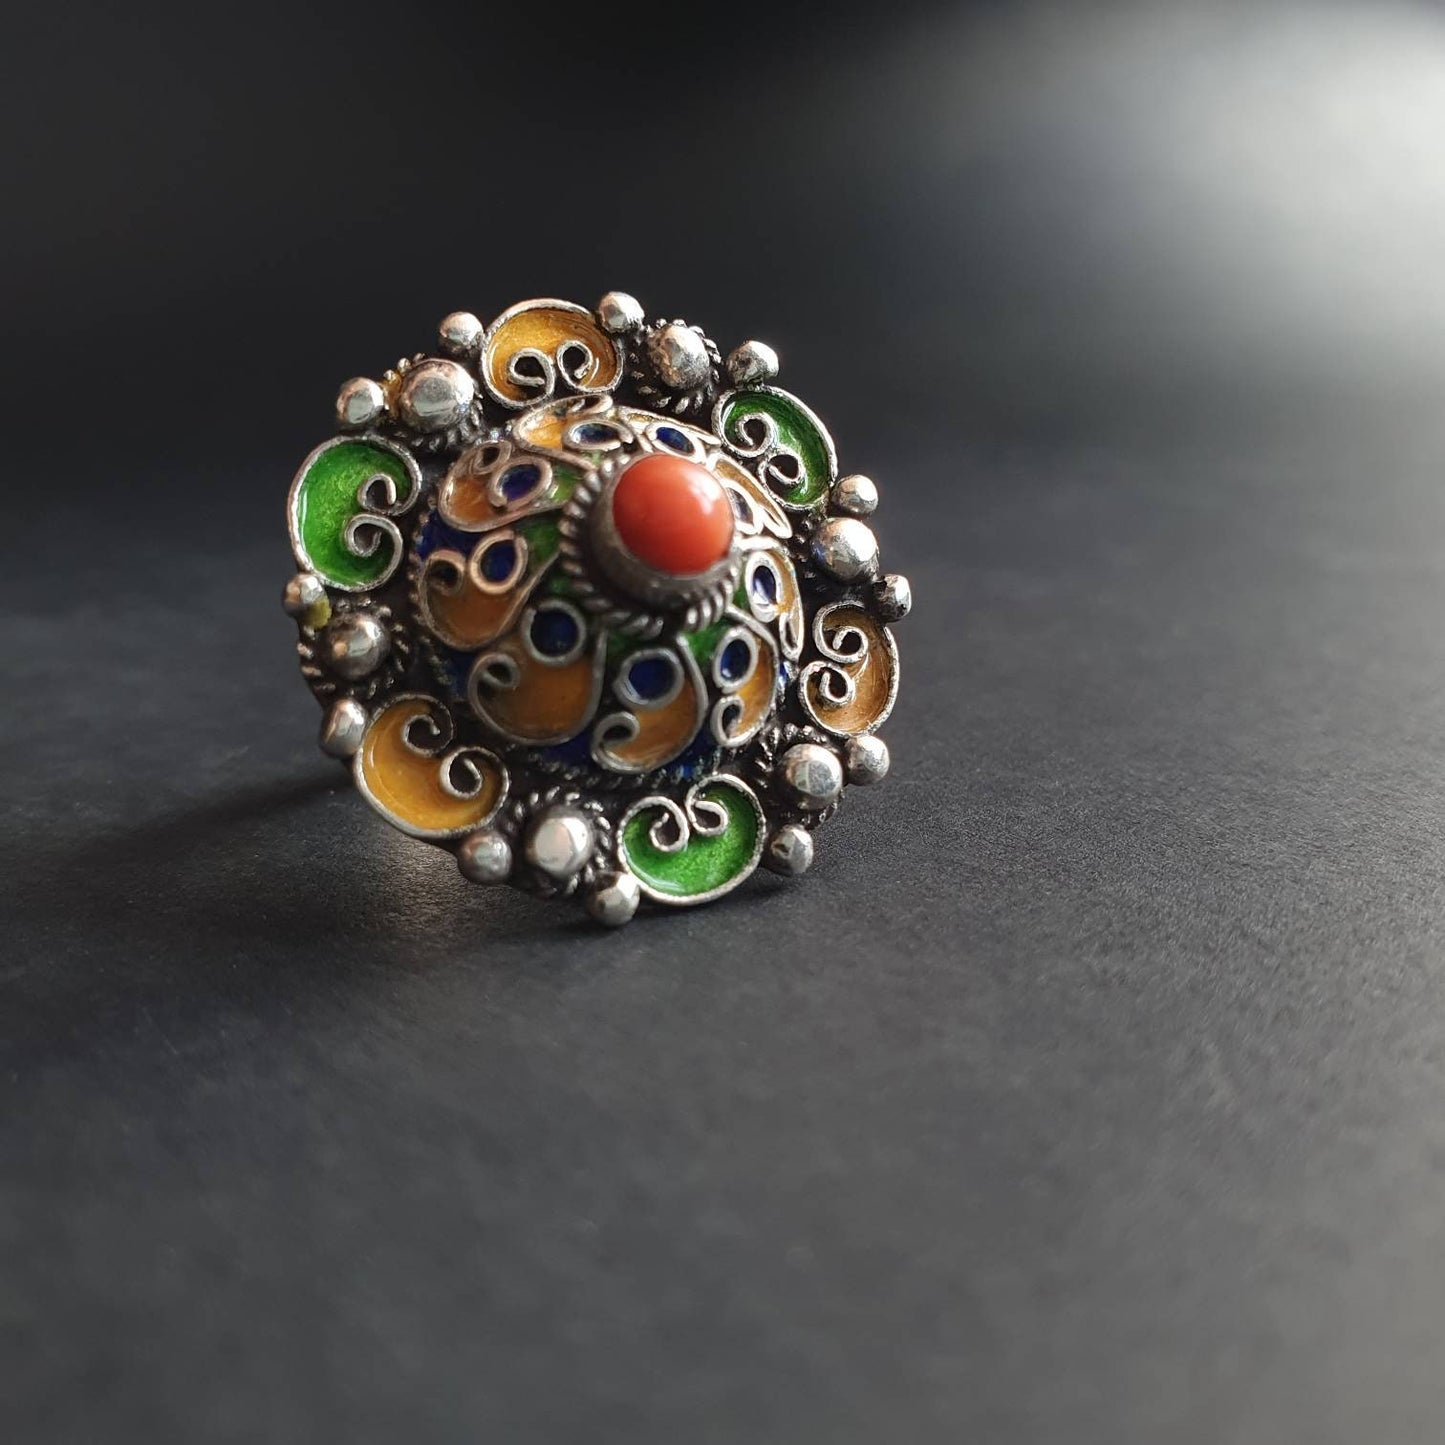 Statement ring, sterling silver ring, enamel ring, sterling silver jewellery, gift's, vintage, handmade, ethnic, tribal jewelry,